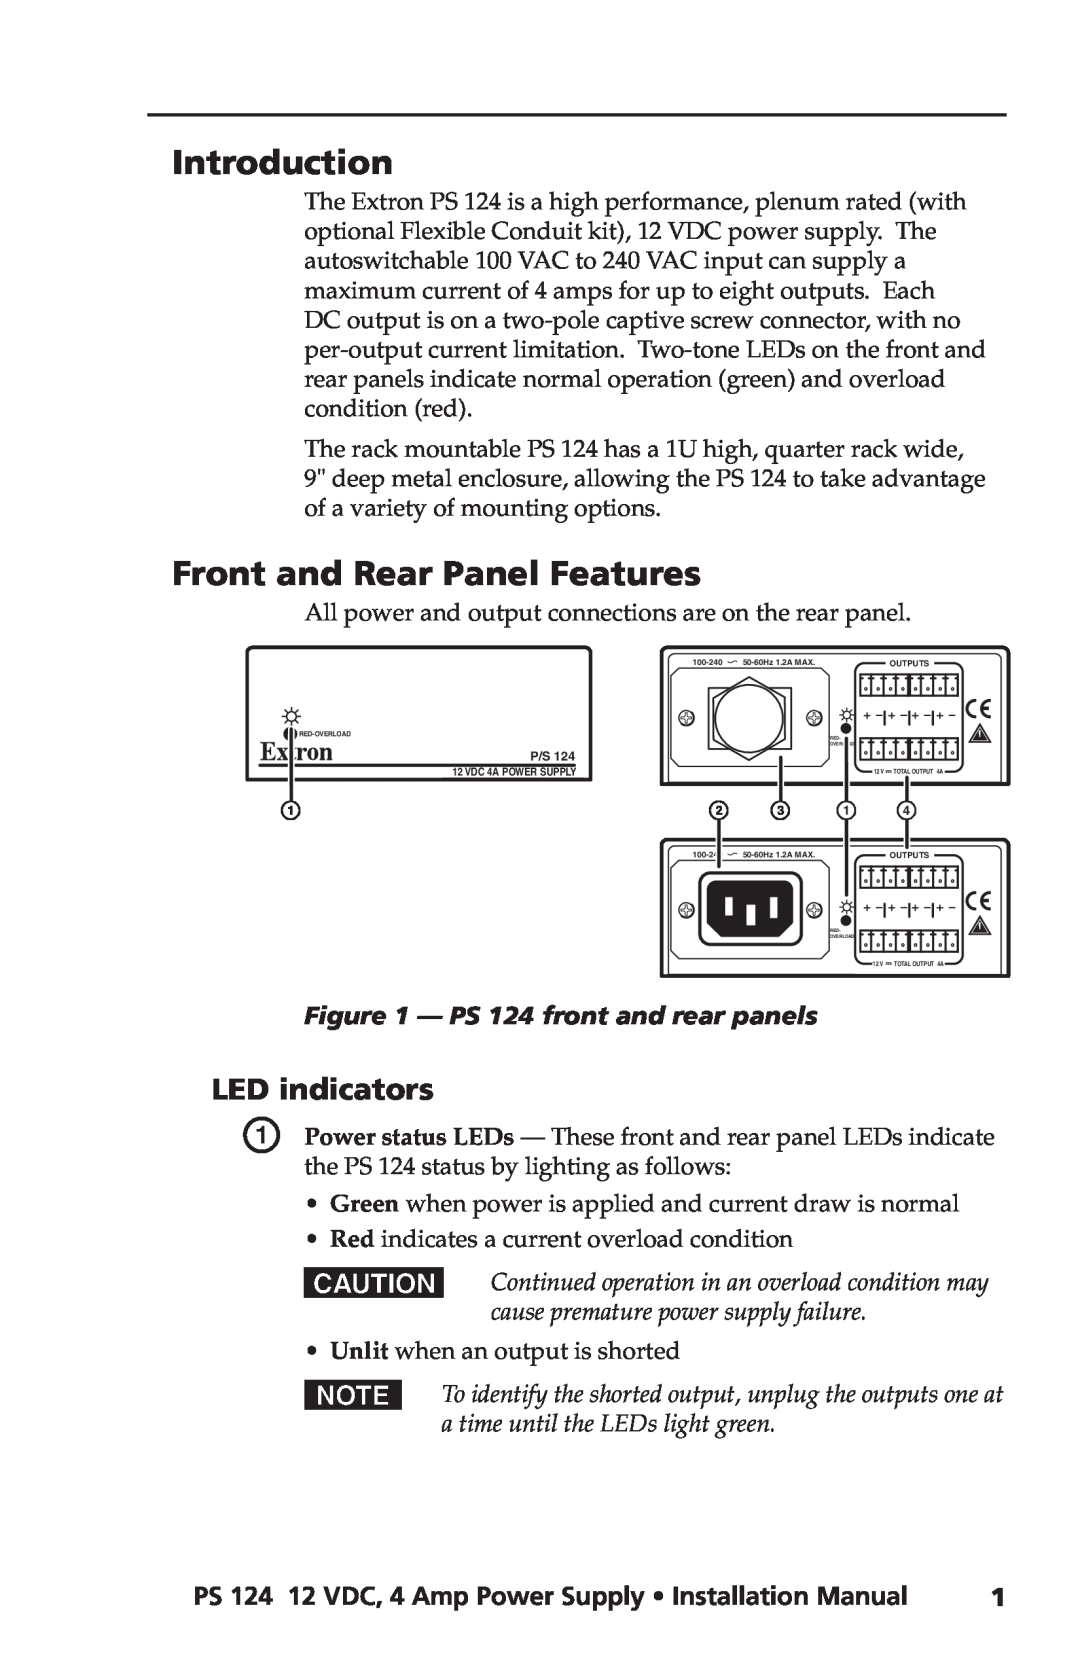 Extron electronic Introduction, Front and Rear Panel Features, LED indicators, PS 124 front and rear panels, D E C F 